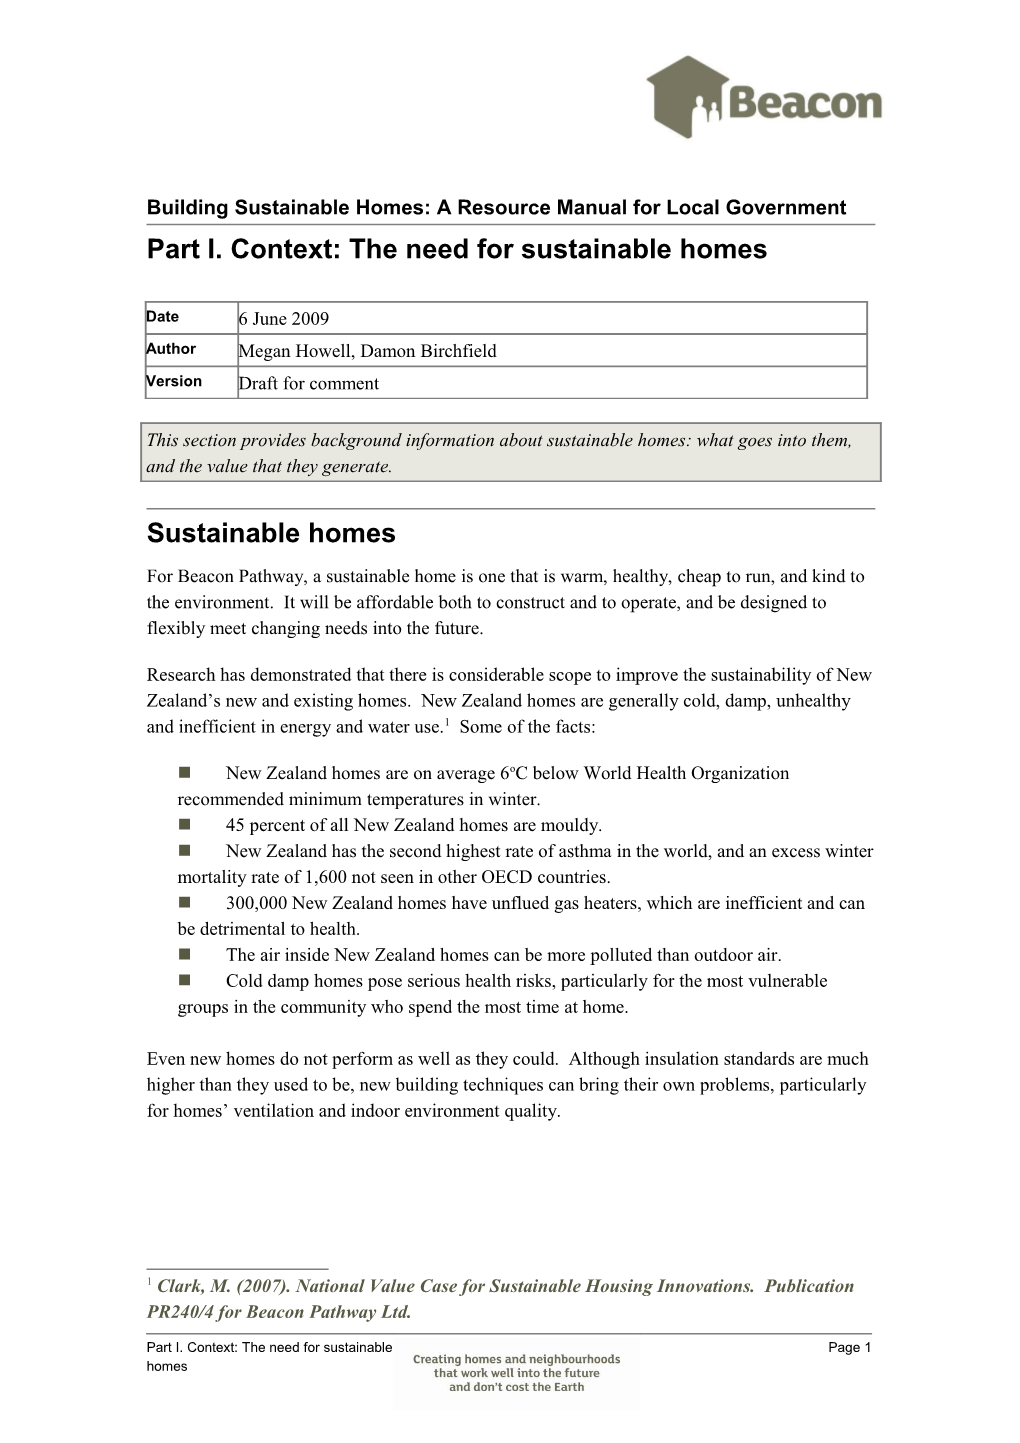 Building Sustainable Homes: a Resource Manual for Local Government